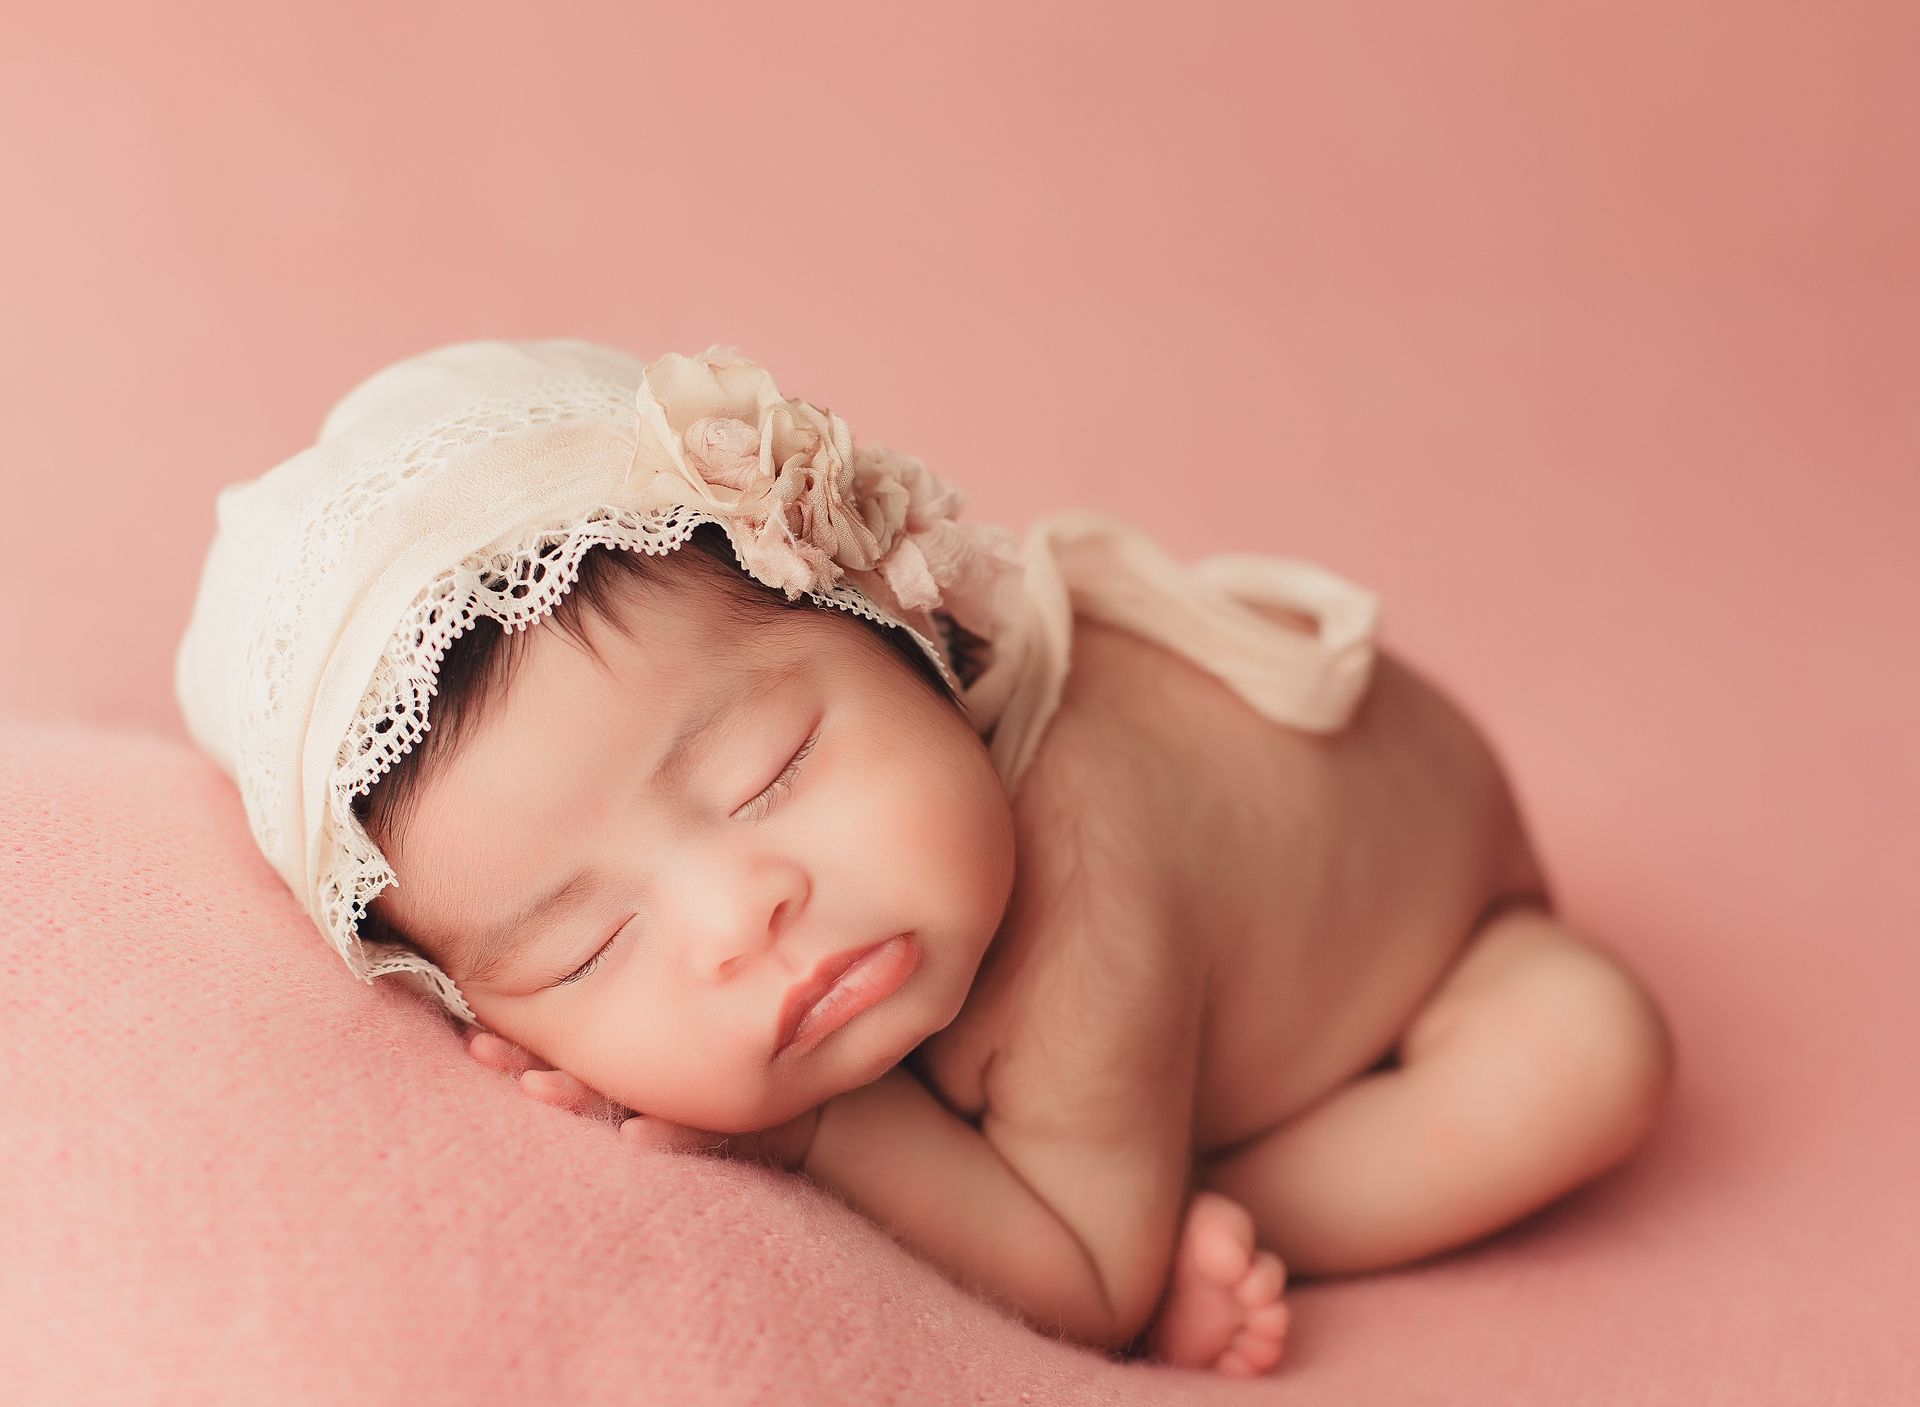 A newborn baby girl wearing a white hat is sleeping on a pink blanket.